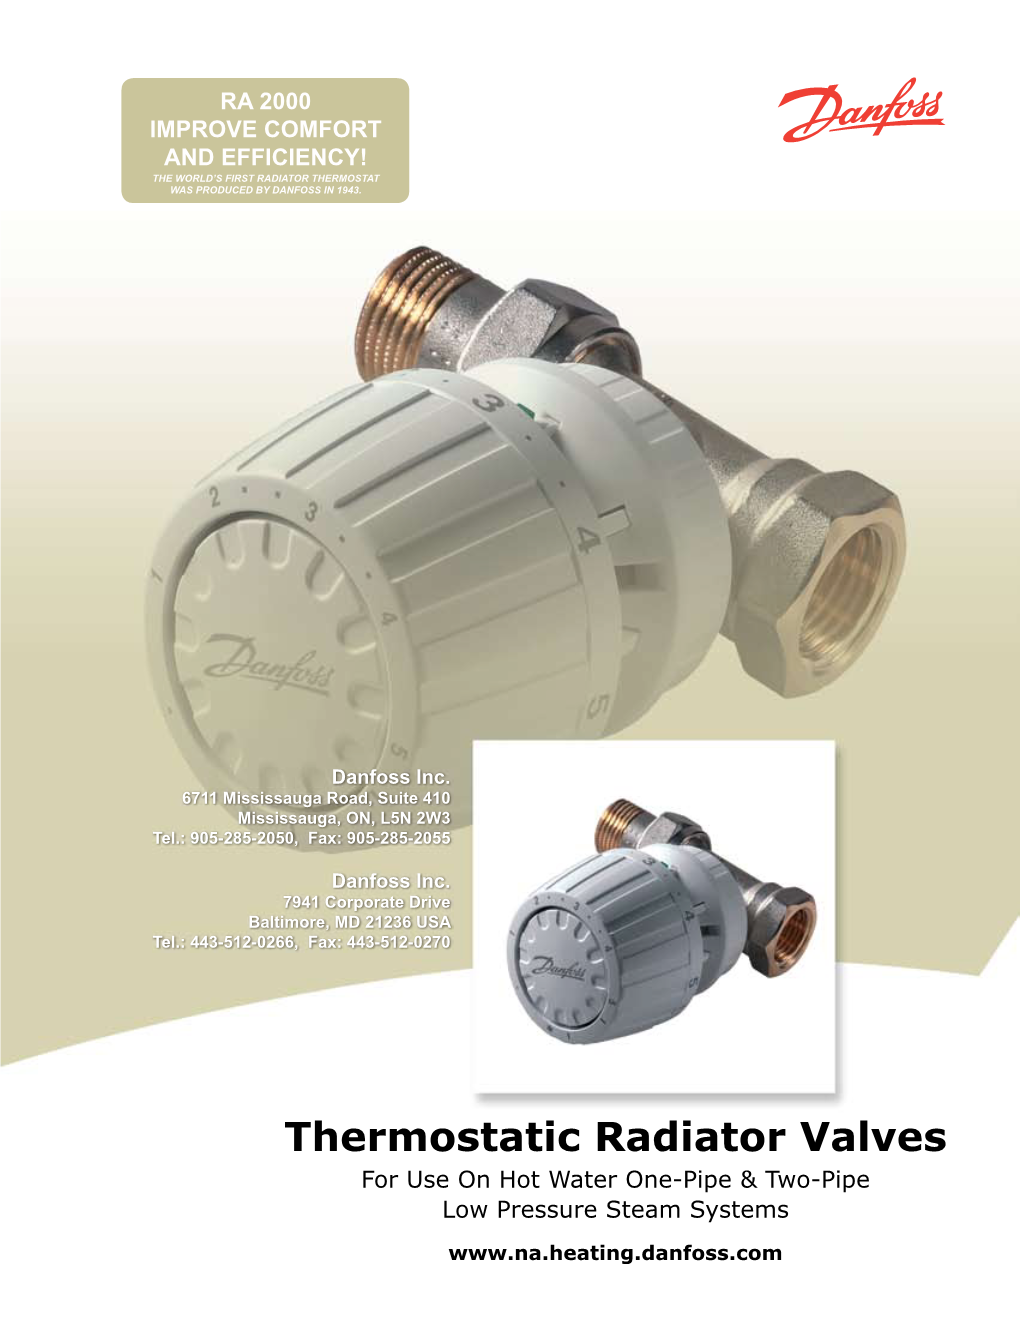 Thermostatic Radiator Valves for Use on Hot Water One-Pipe & Two-Pipe Low Pressure Steam Systems